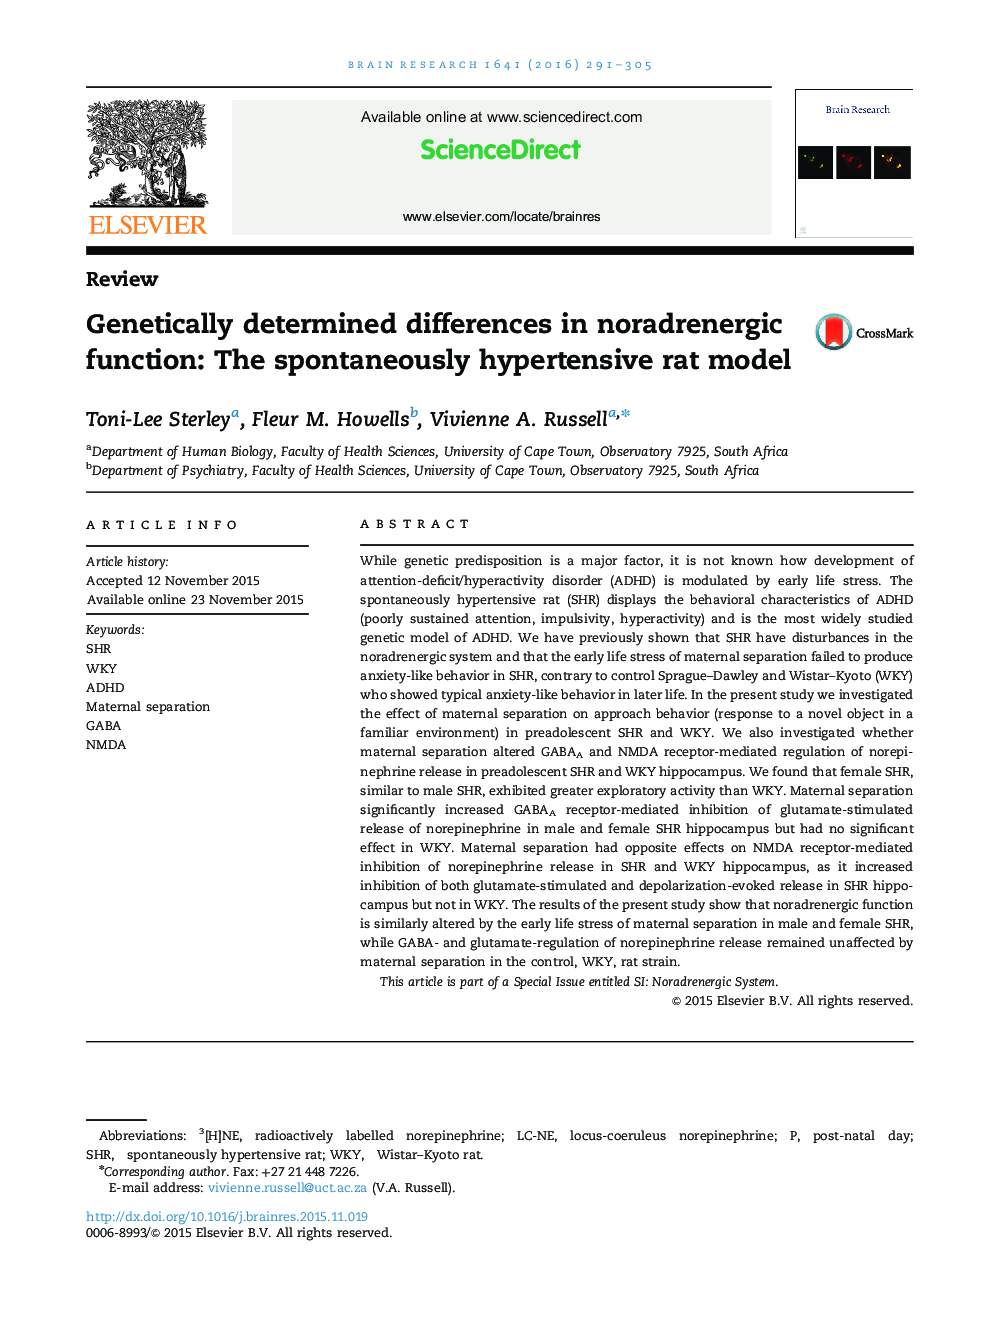 ReviewGenetically determined differences in noradrenergic function: The spontaneously hypertensive rat model